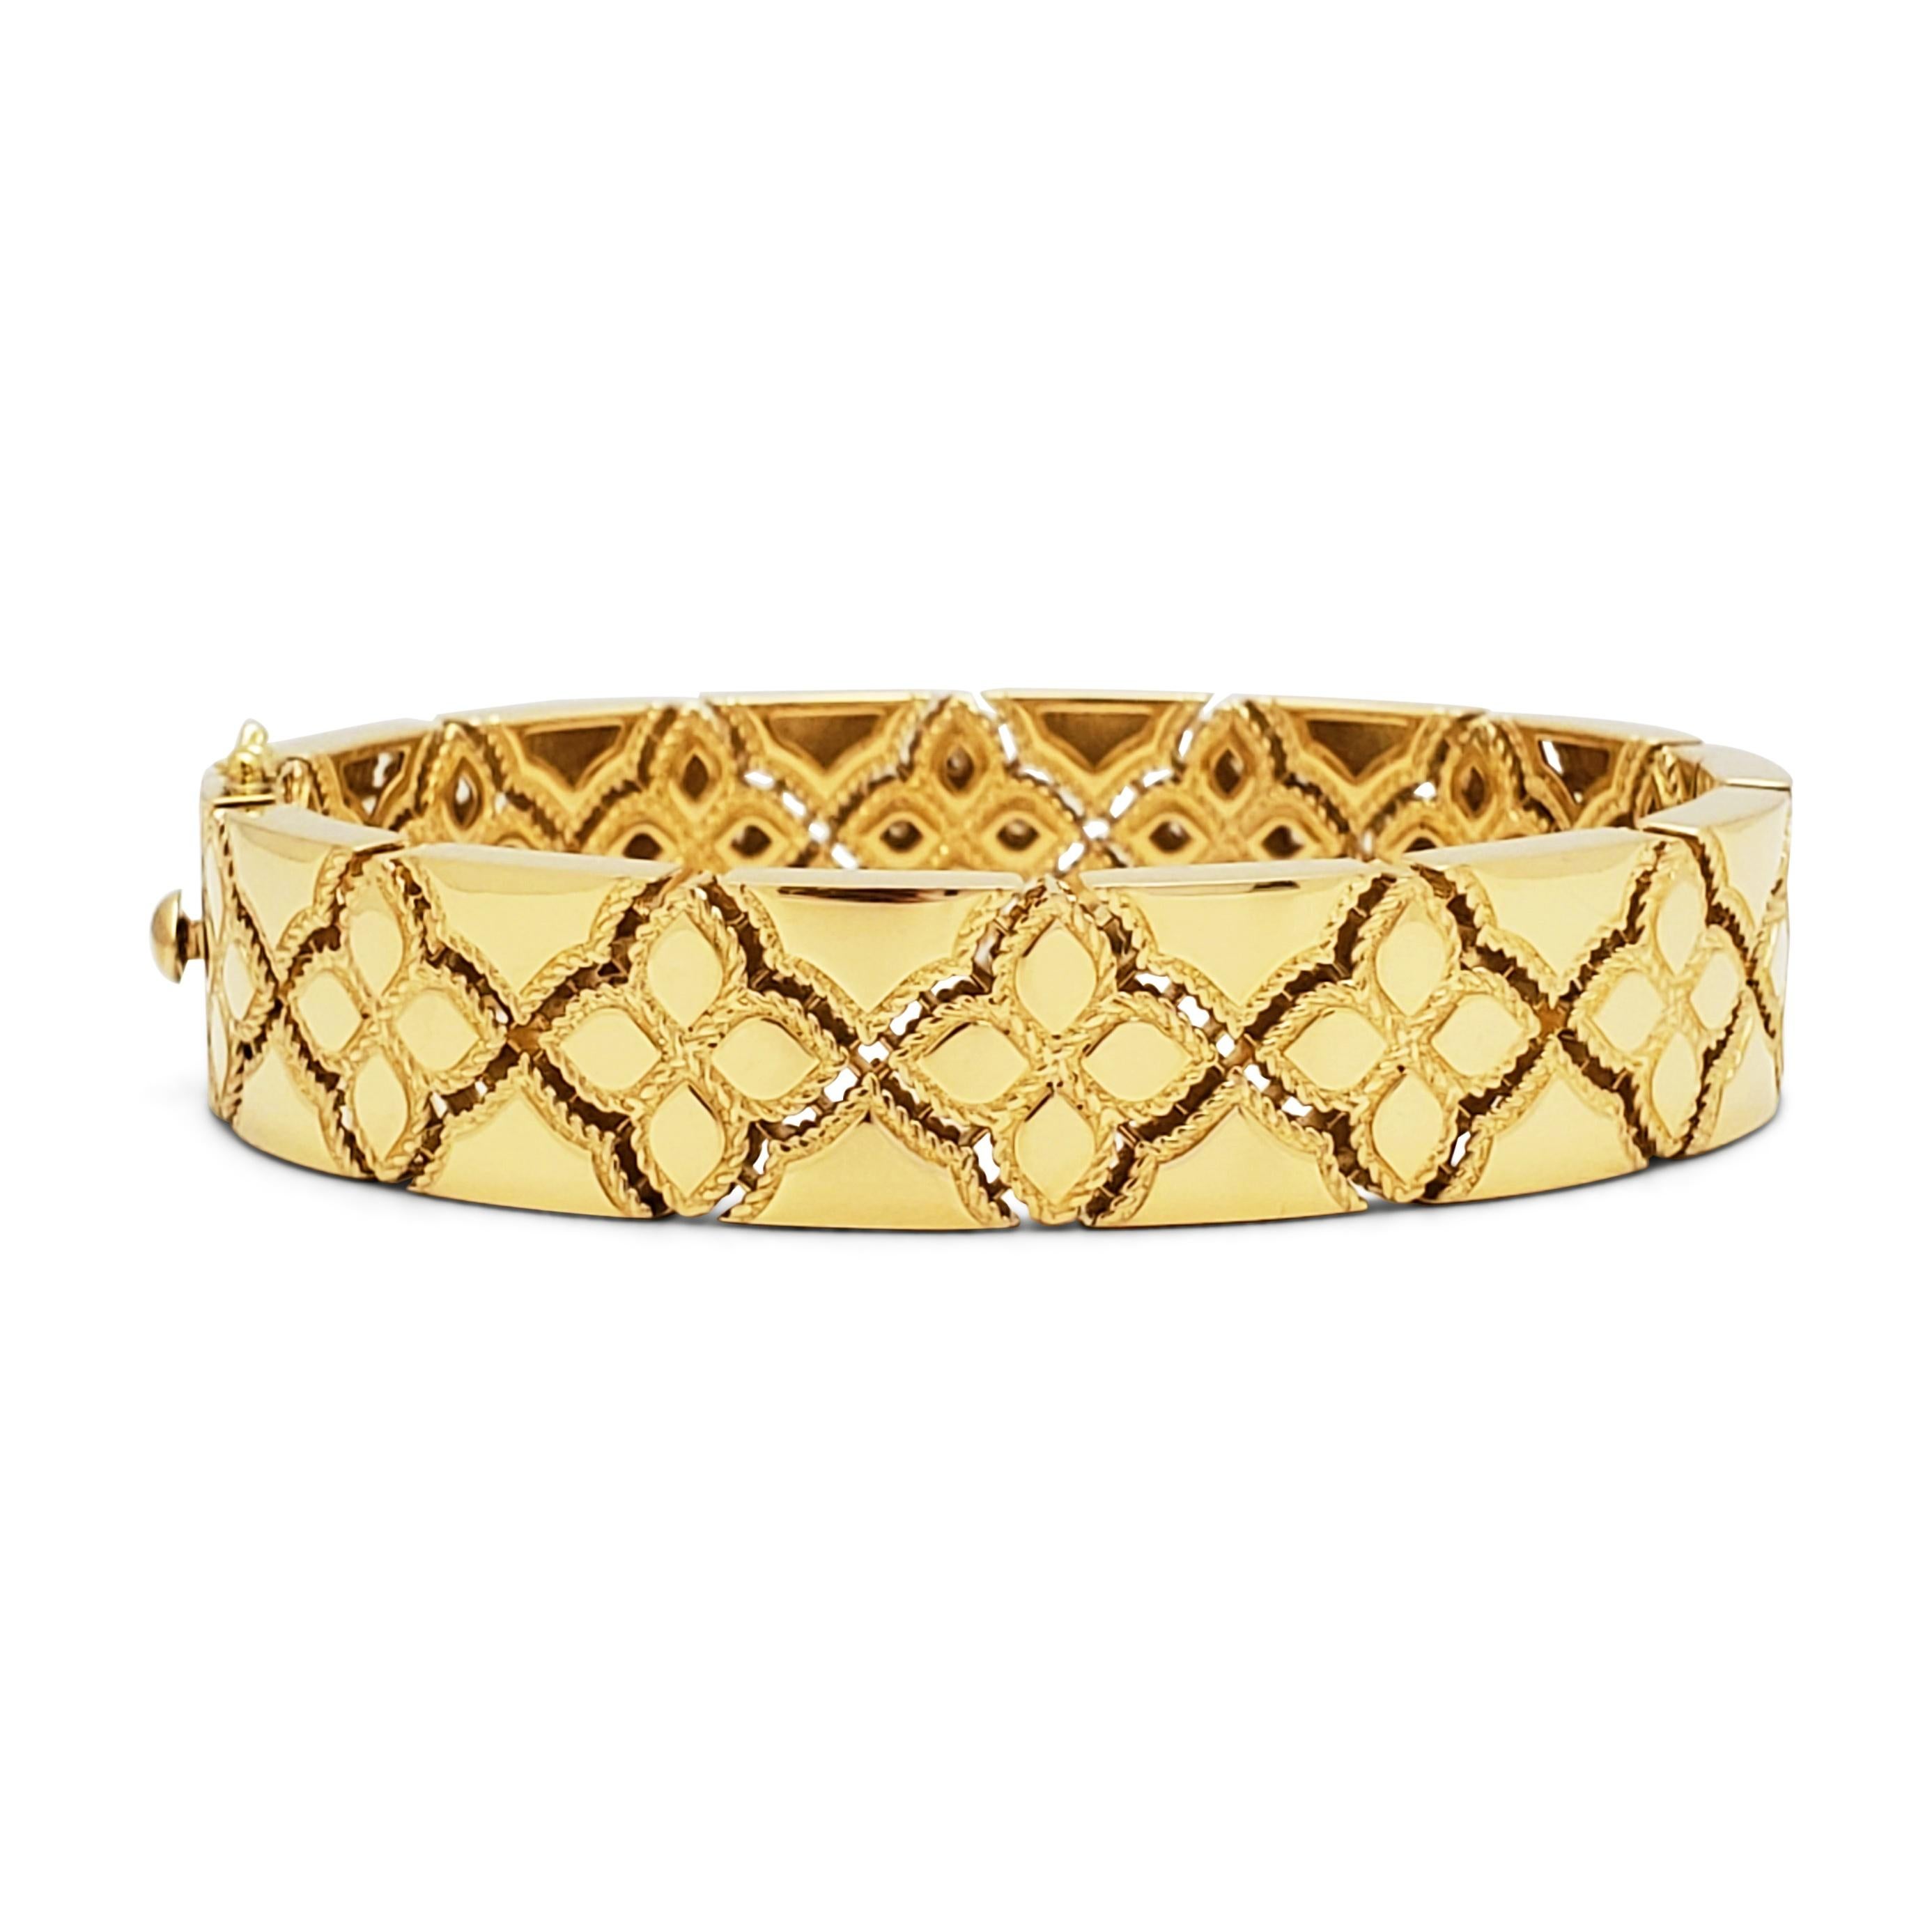 Authentic Roberto Coin bracelet from the Venetian Princess collection crafted in 18 karat yellow gold.  Featuring floral-inspired cutouts accented on one half of the bracelet with round brilliant cut diamonds for an estimated .30 carats total